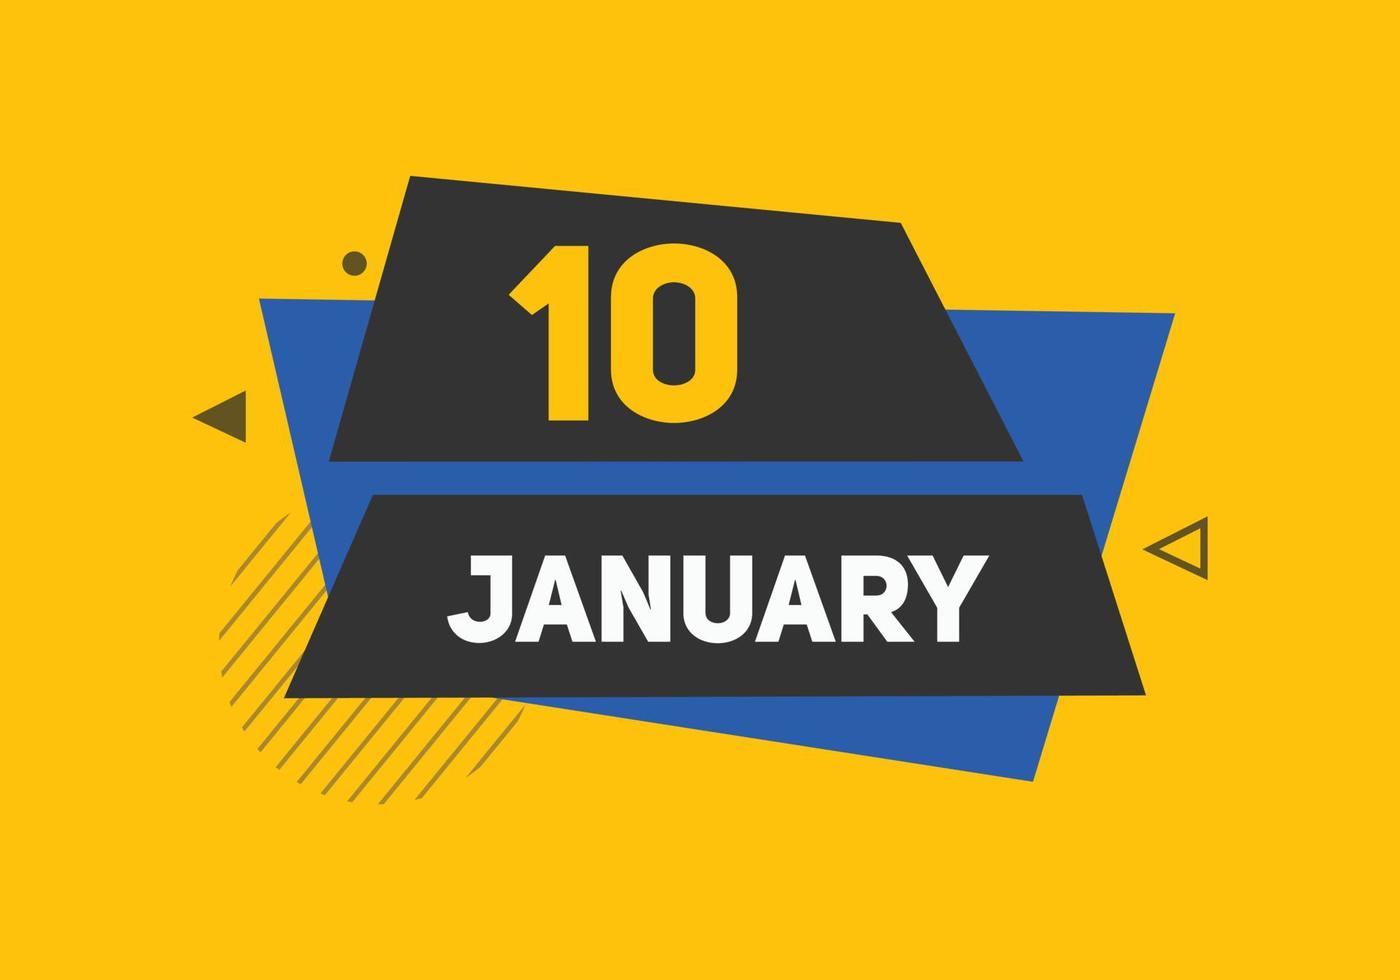 january 10 calendar reminder. 10th january daily calendar icon template. Calendar 10th january icon Design template. Vector illustration